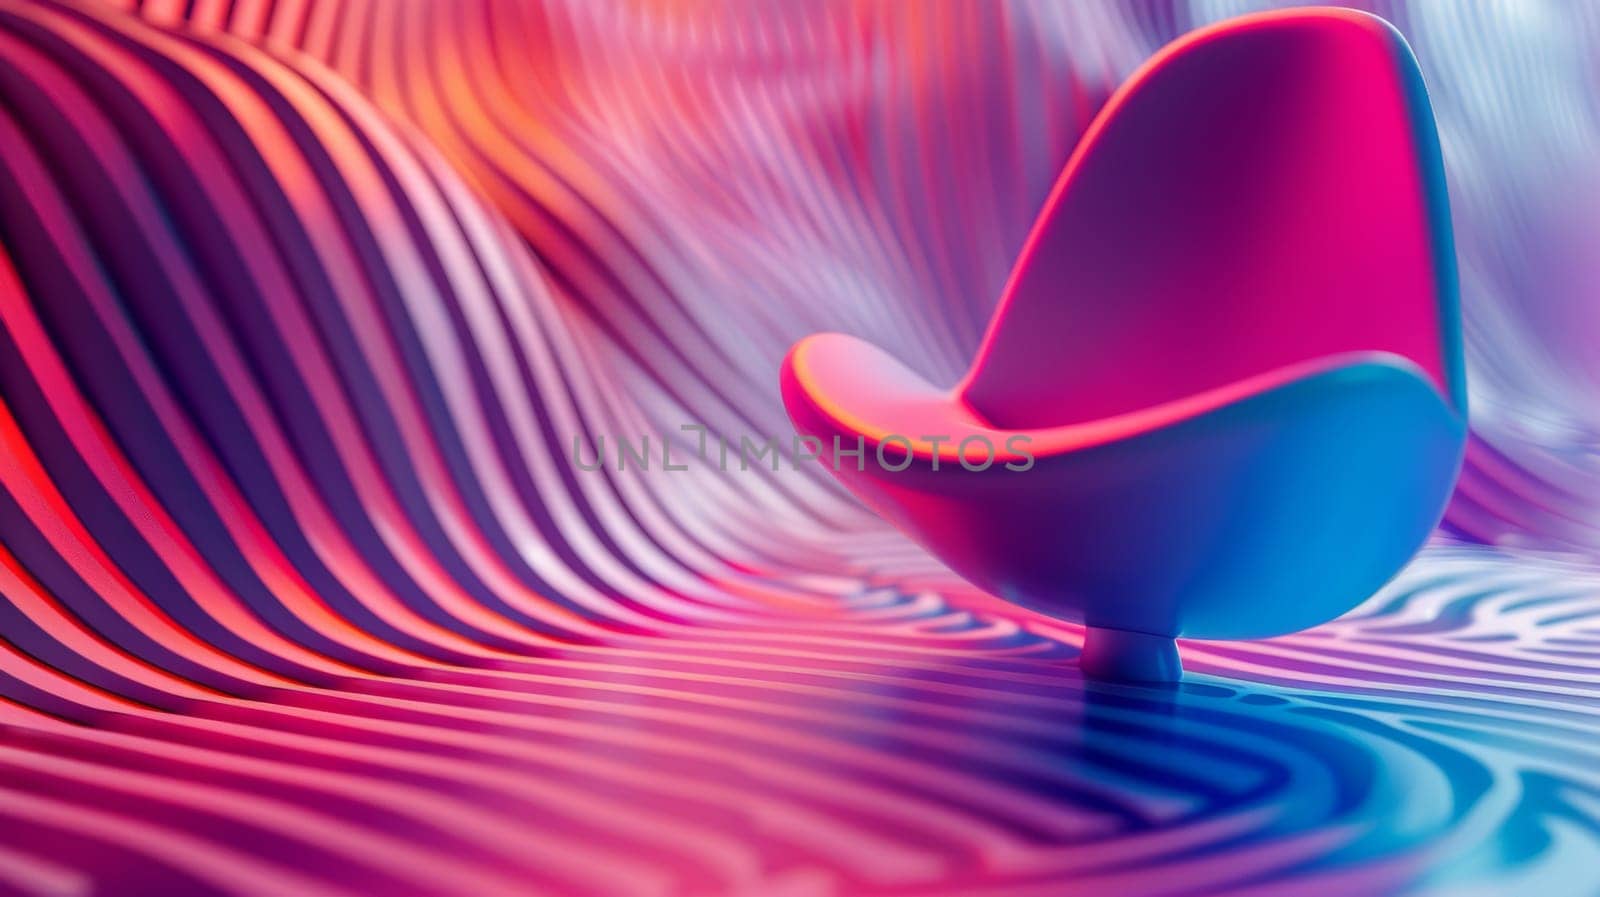 A chair is sitting on a colorful wave patterned background